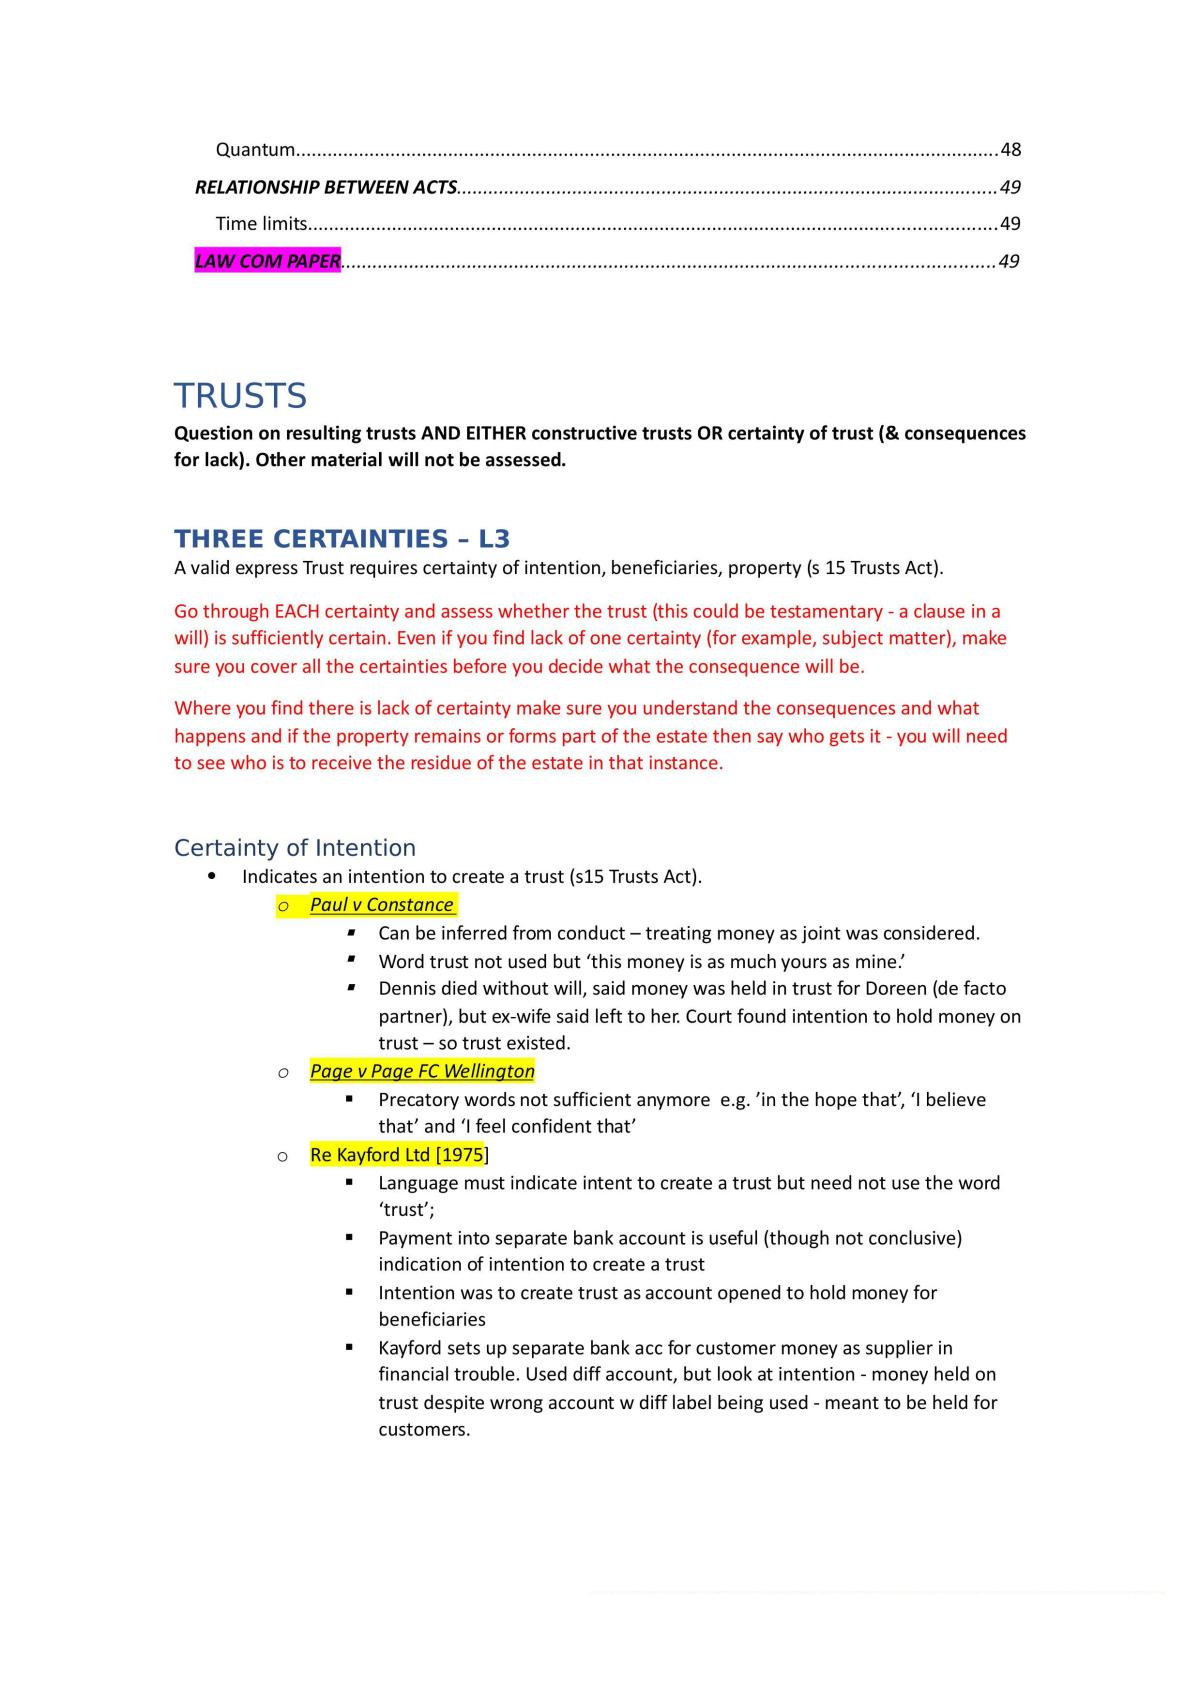 Equity and Trusts Course Notes - Page 3